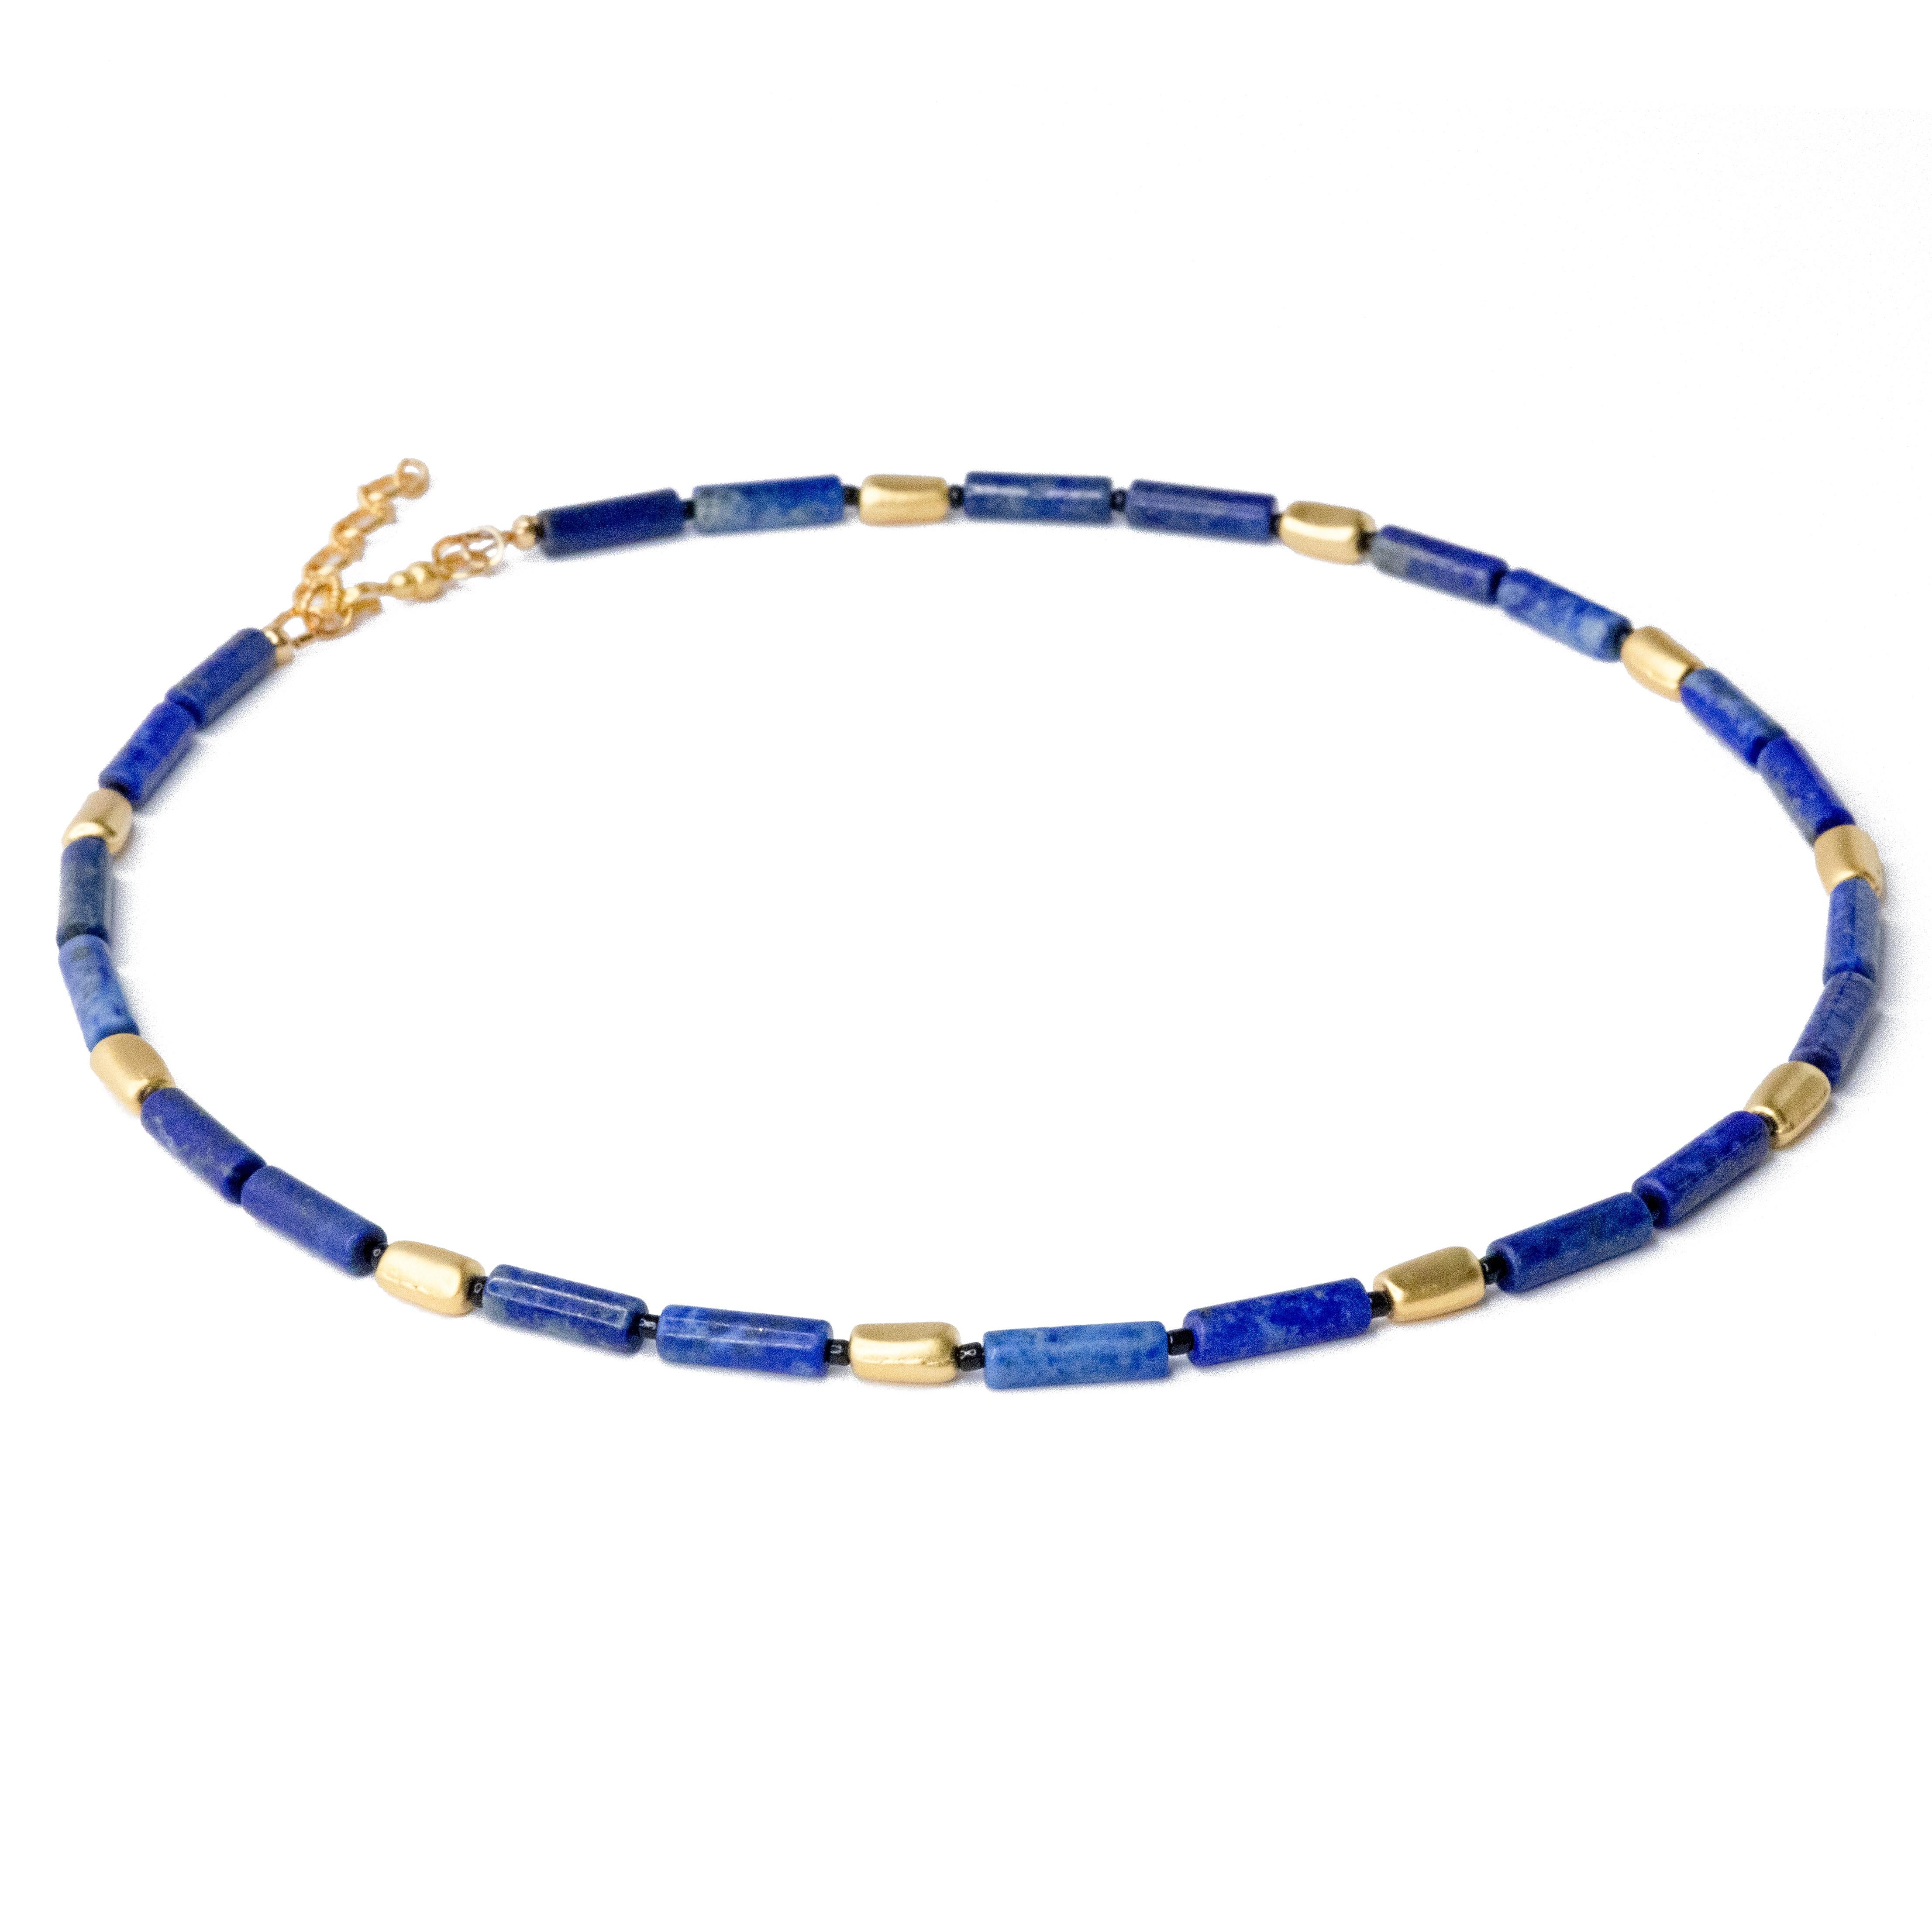 Women's Lapis Lazuli Gold Beaded Necklace II- Lapis Link Necklace by Bombyx House For Sale